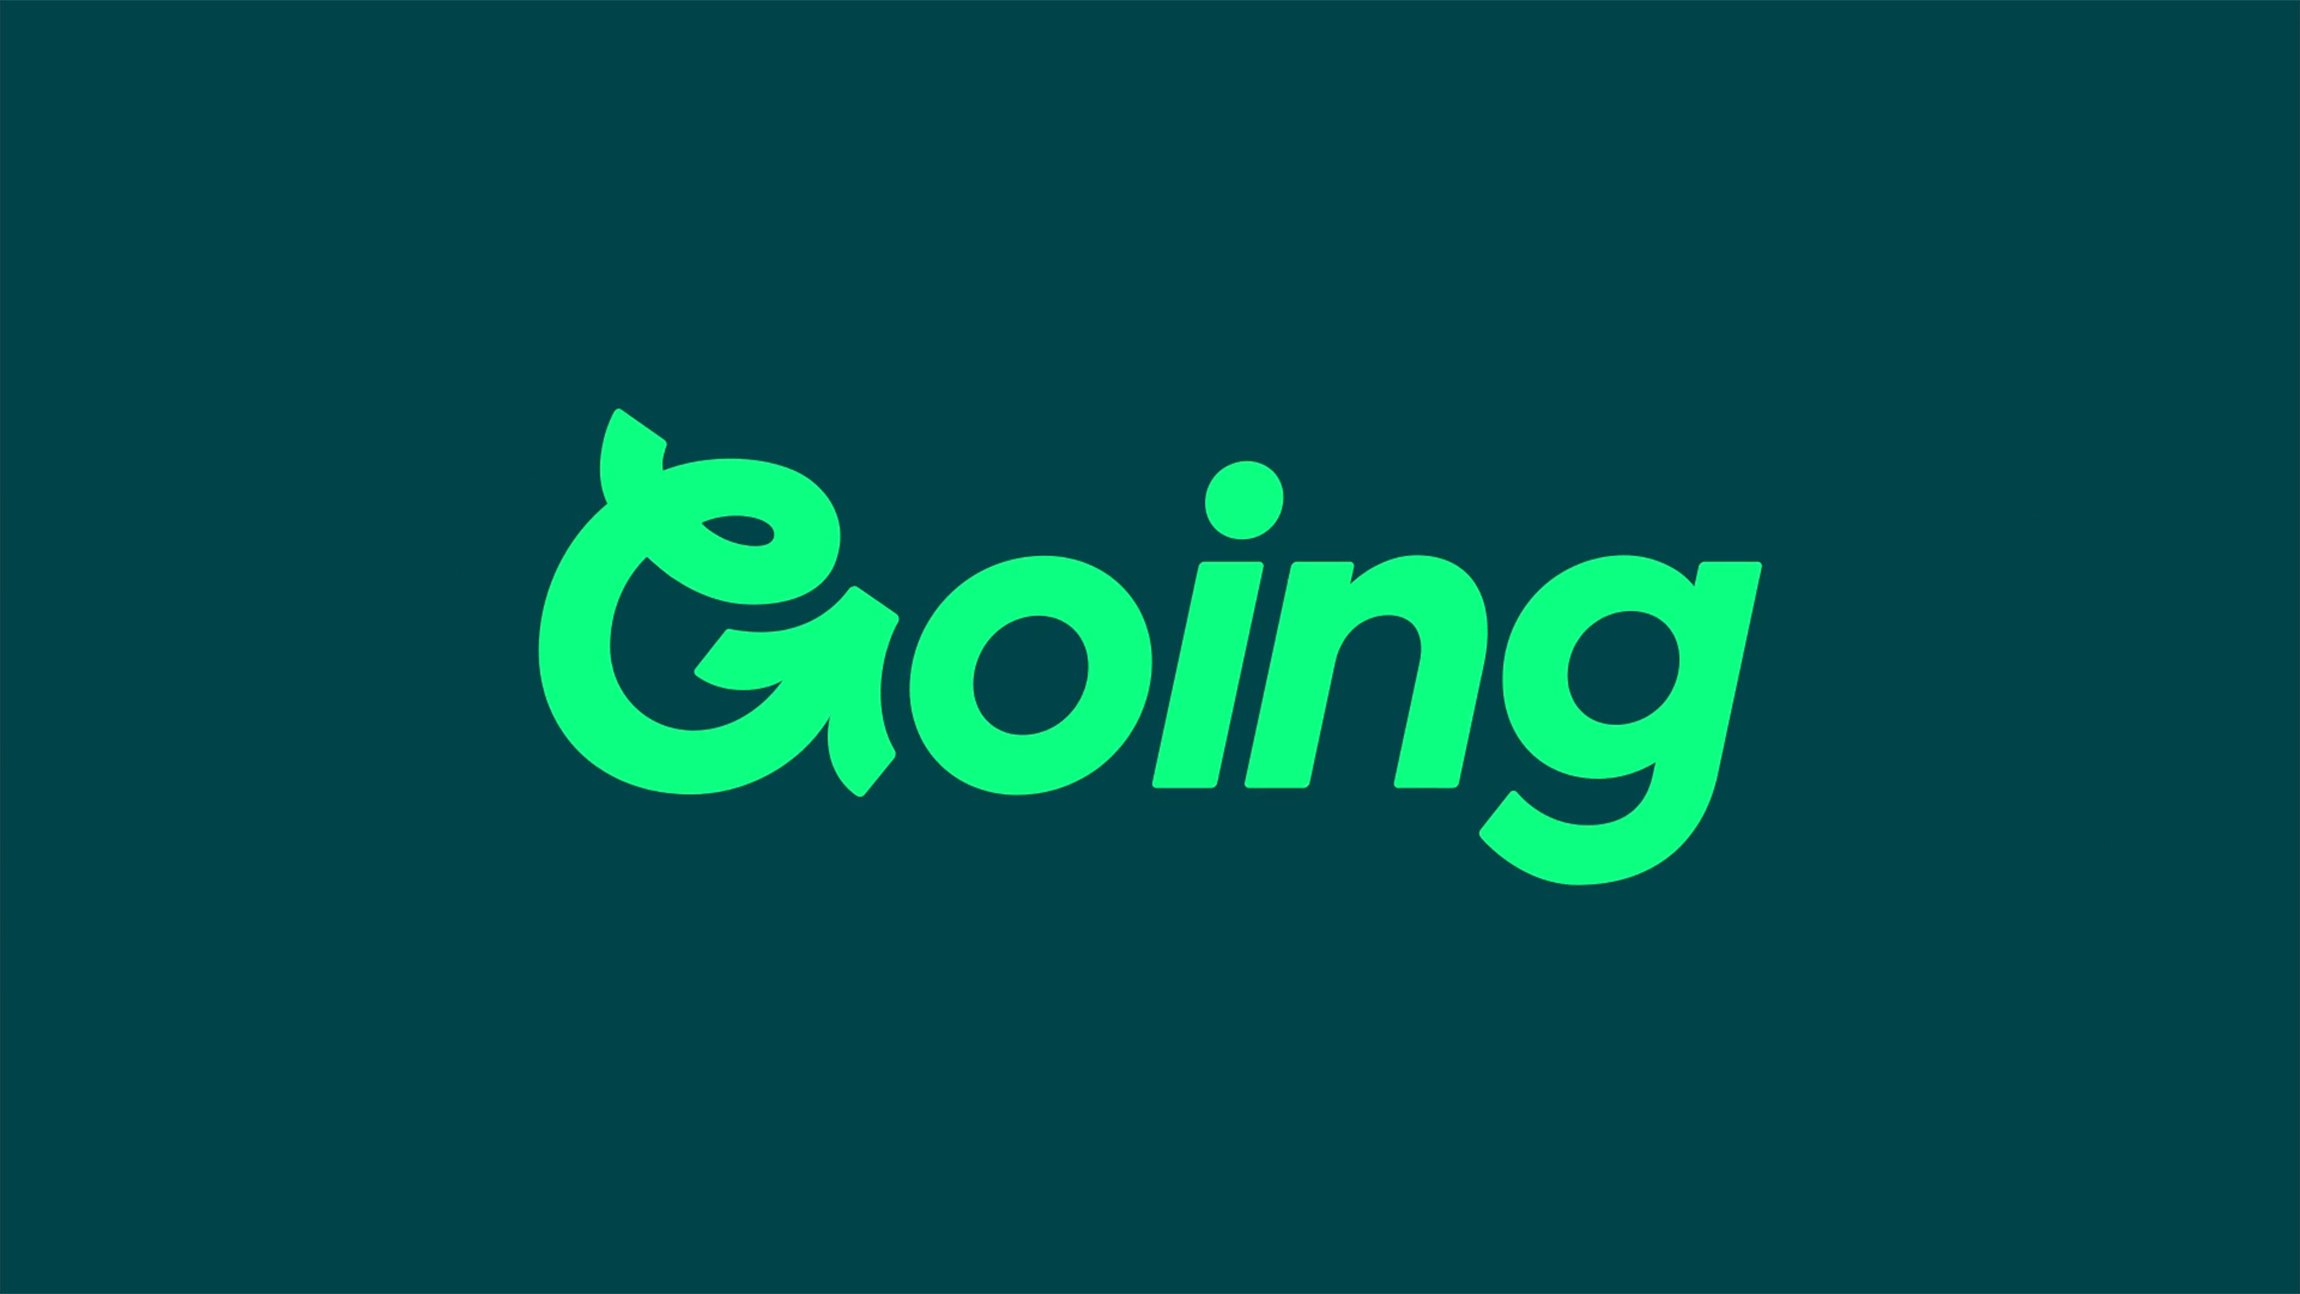 Logotype by Design Studio for Going, formerly Scott’s Cheap Flights